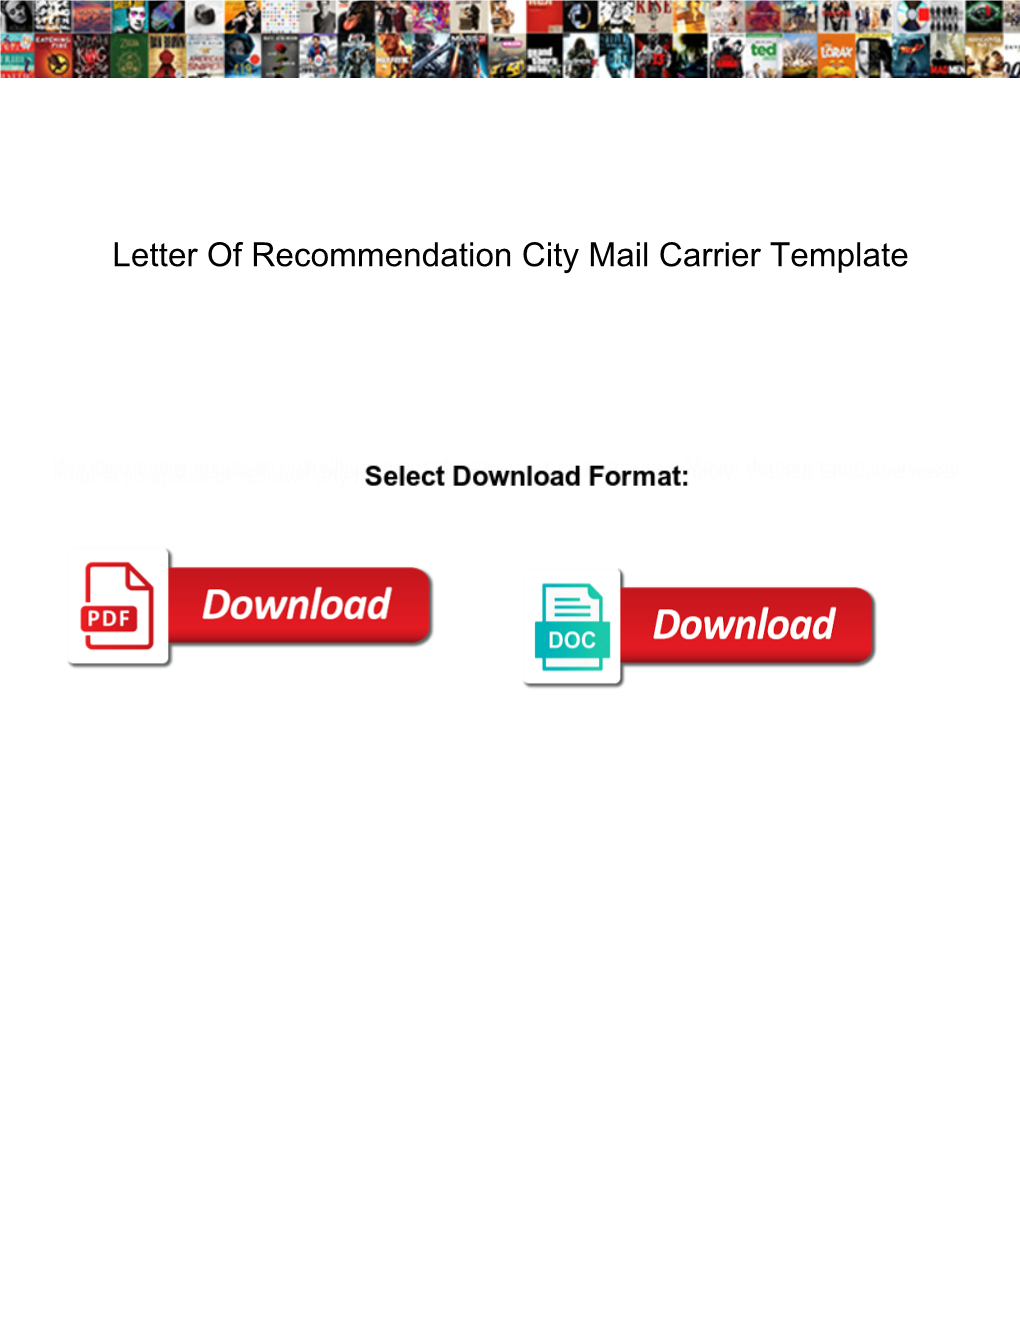 Letter of Recommendation City Mail Carrier Template